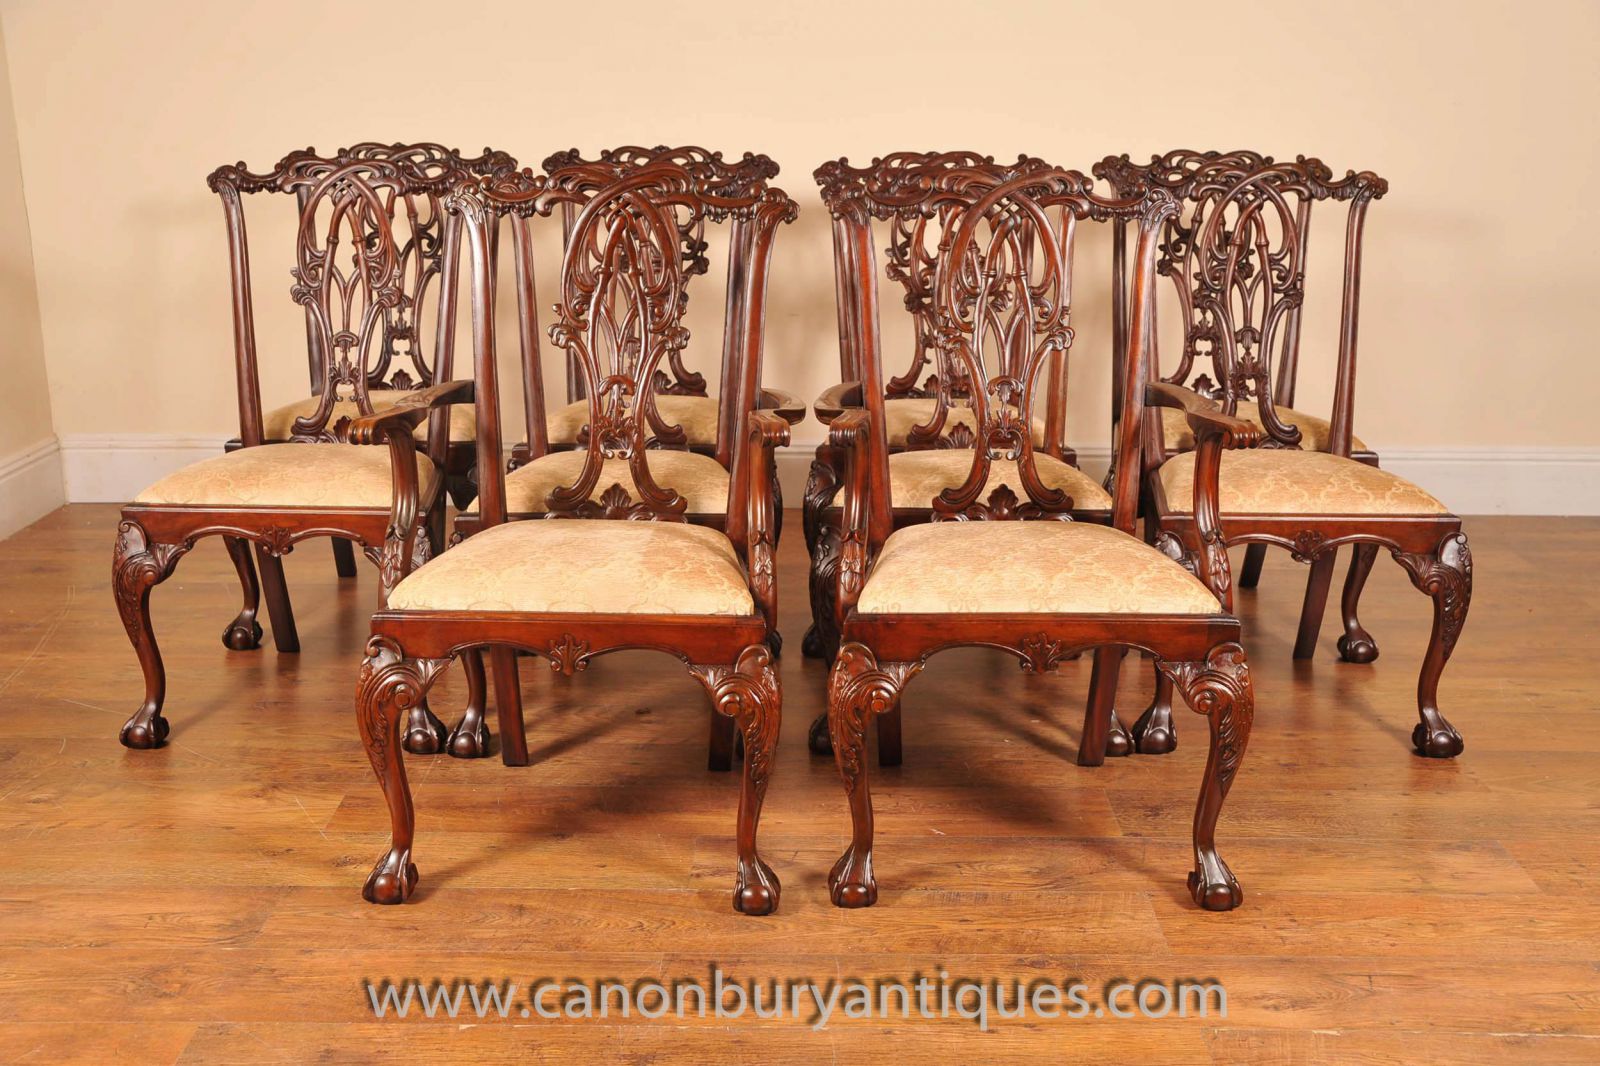 Set of Chippendale chairs with ball and claw feet